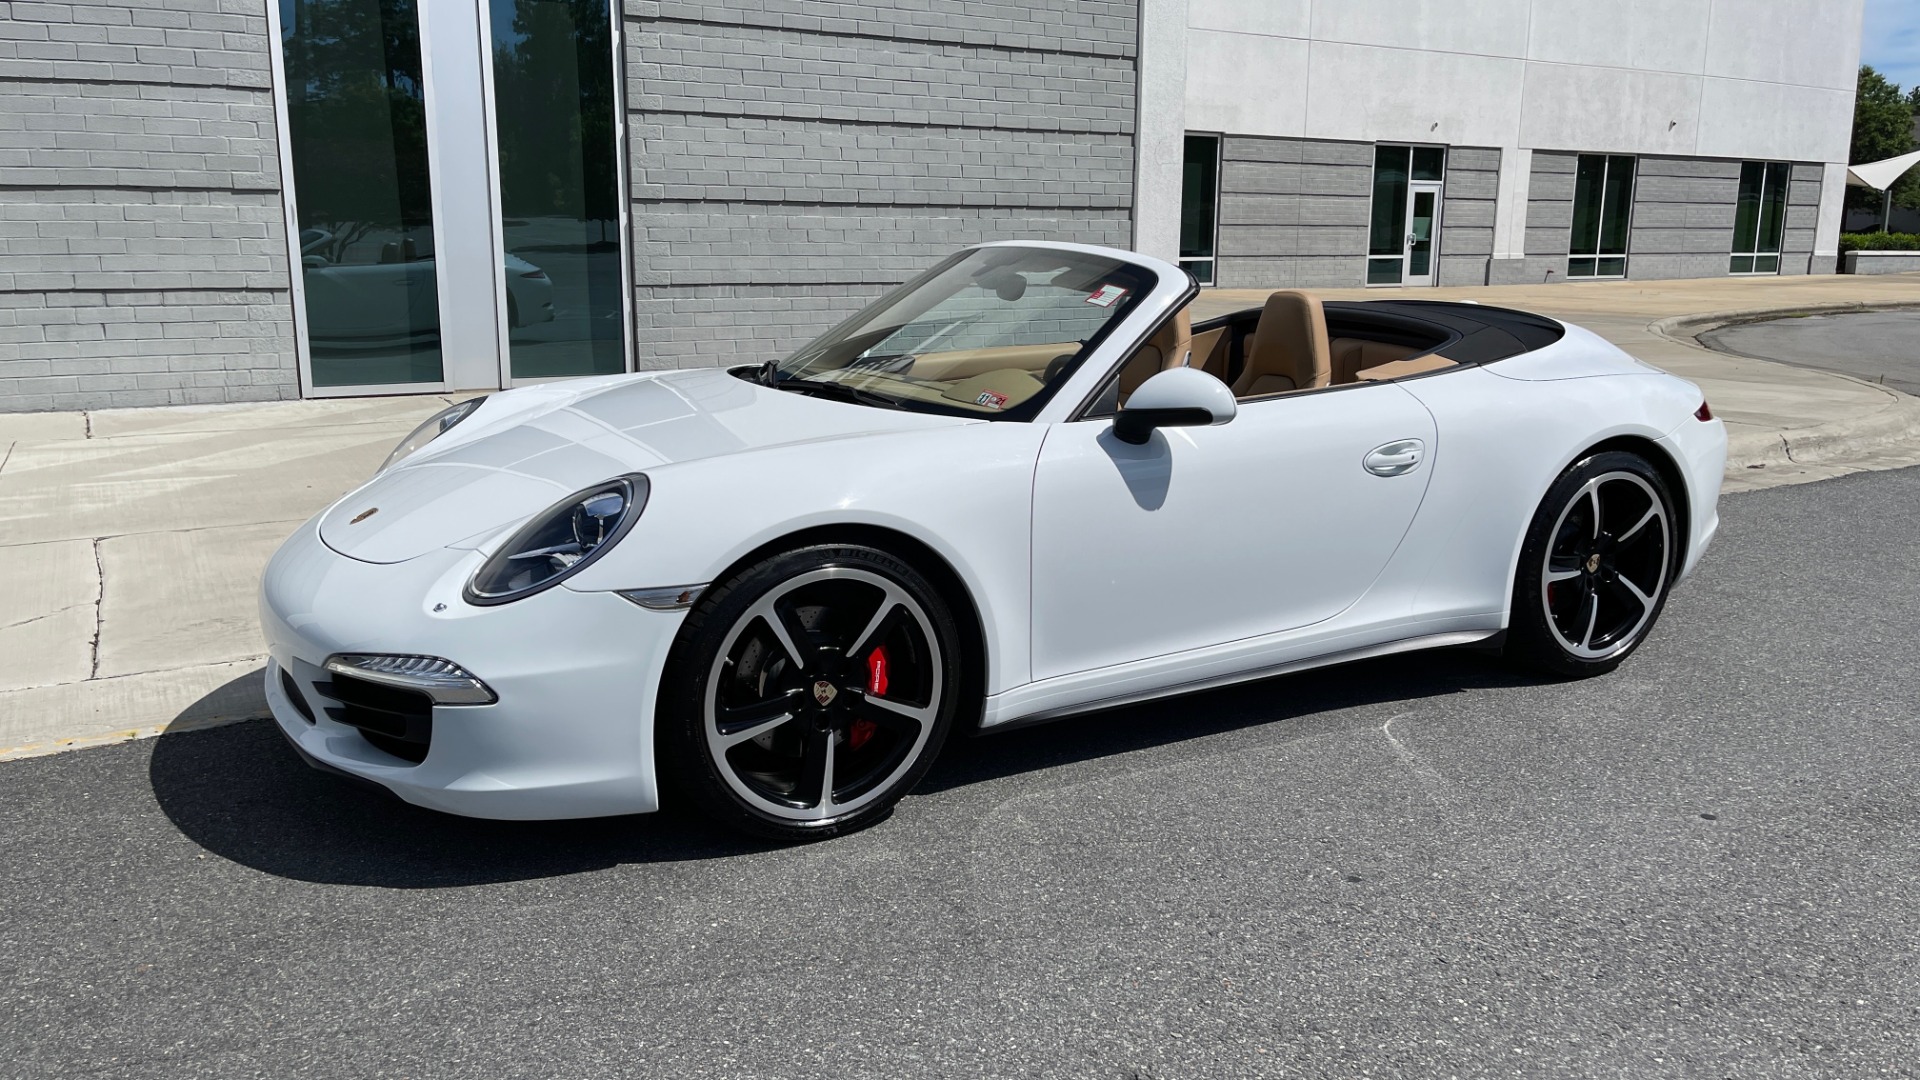 Used 2013 Porsche 911 CARRERA 4S CABRIOLET / PREMIUM PLUS / BOSE / PDK / PDLS for sale Sold at Formula Imports in Charlotte NC 28227 3